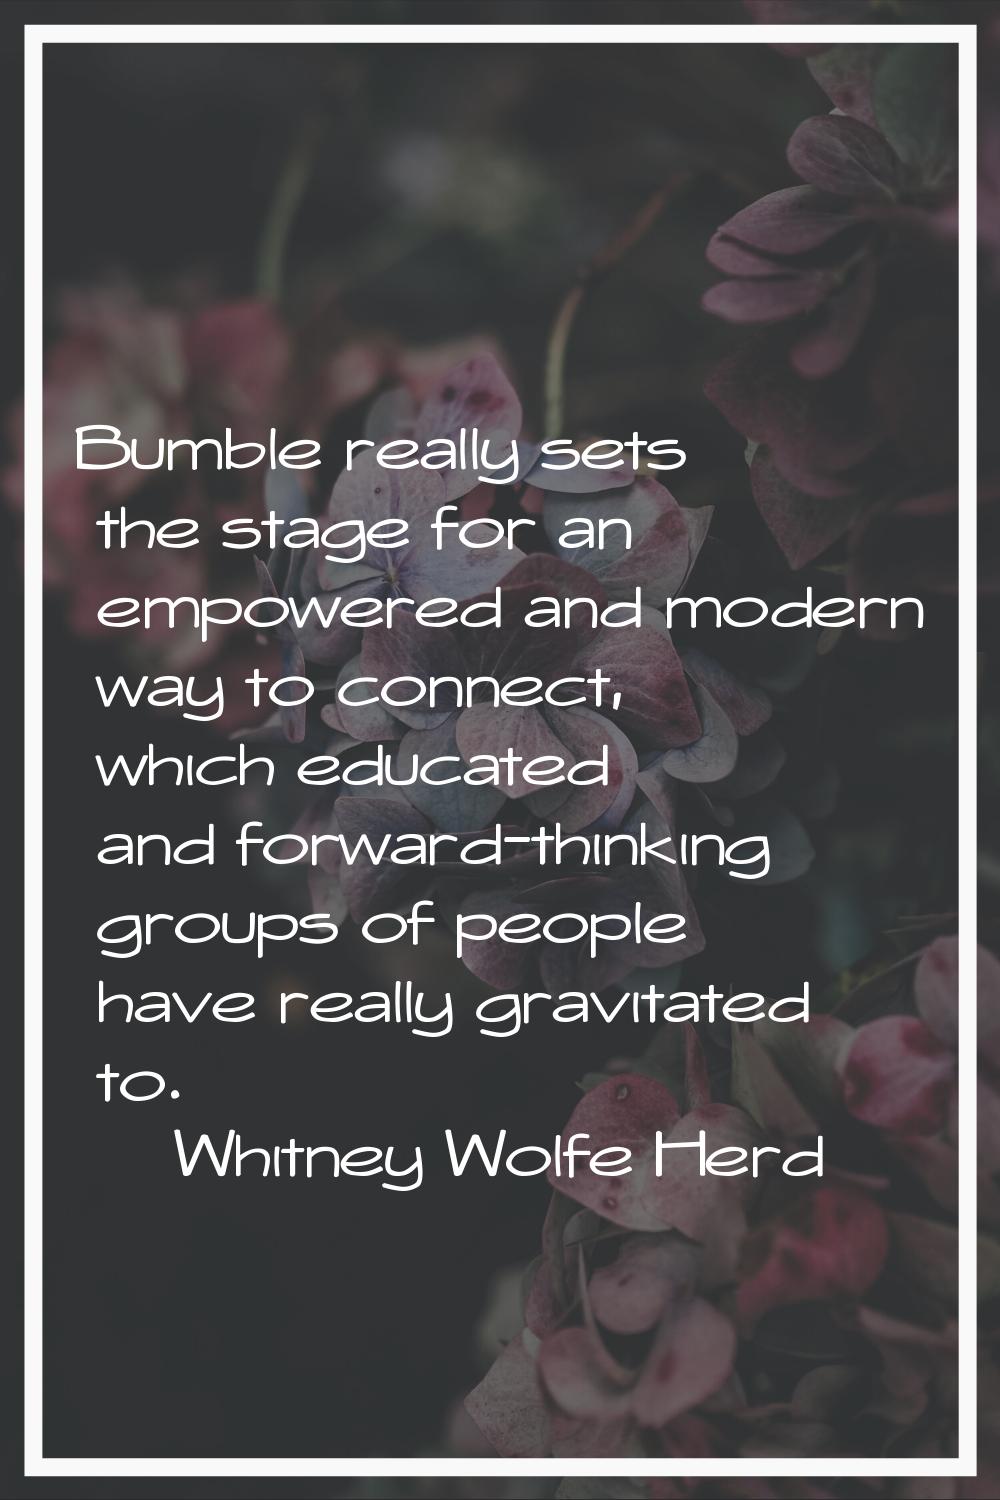 Bumble really sets the stage for an empowered and modern way to connect, which educated and forward